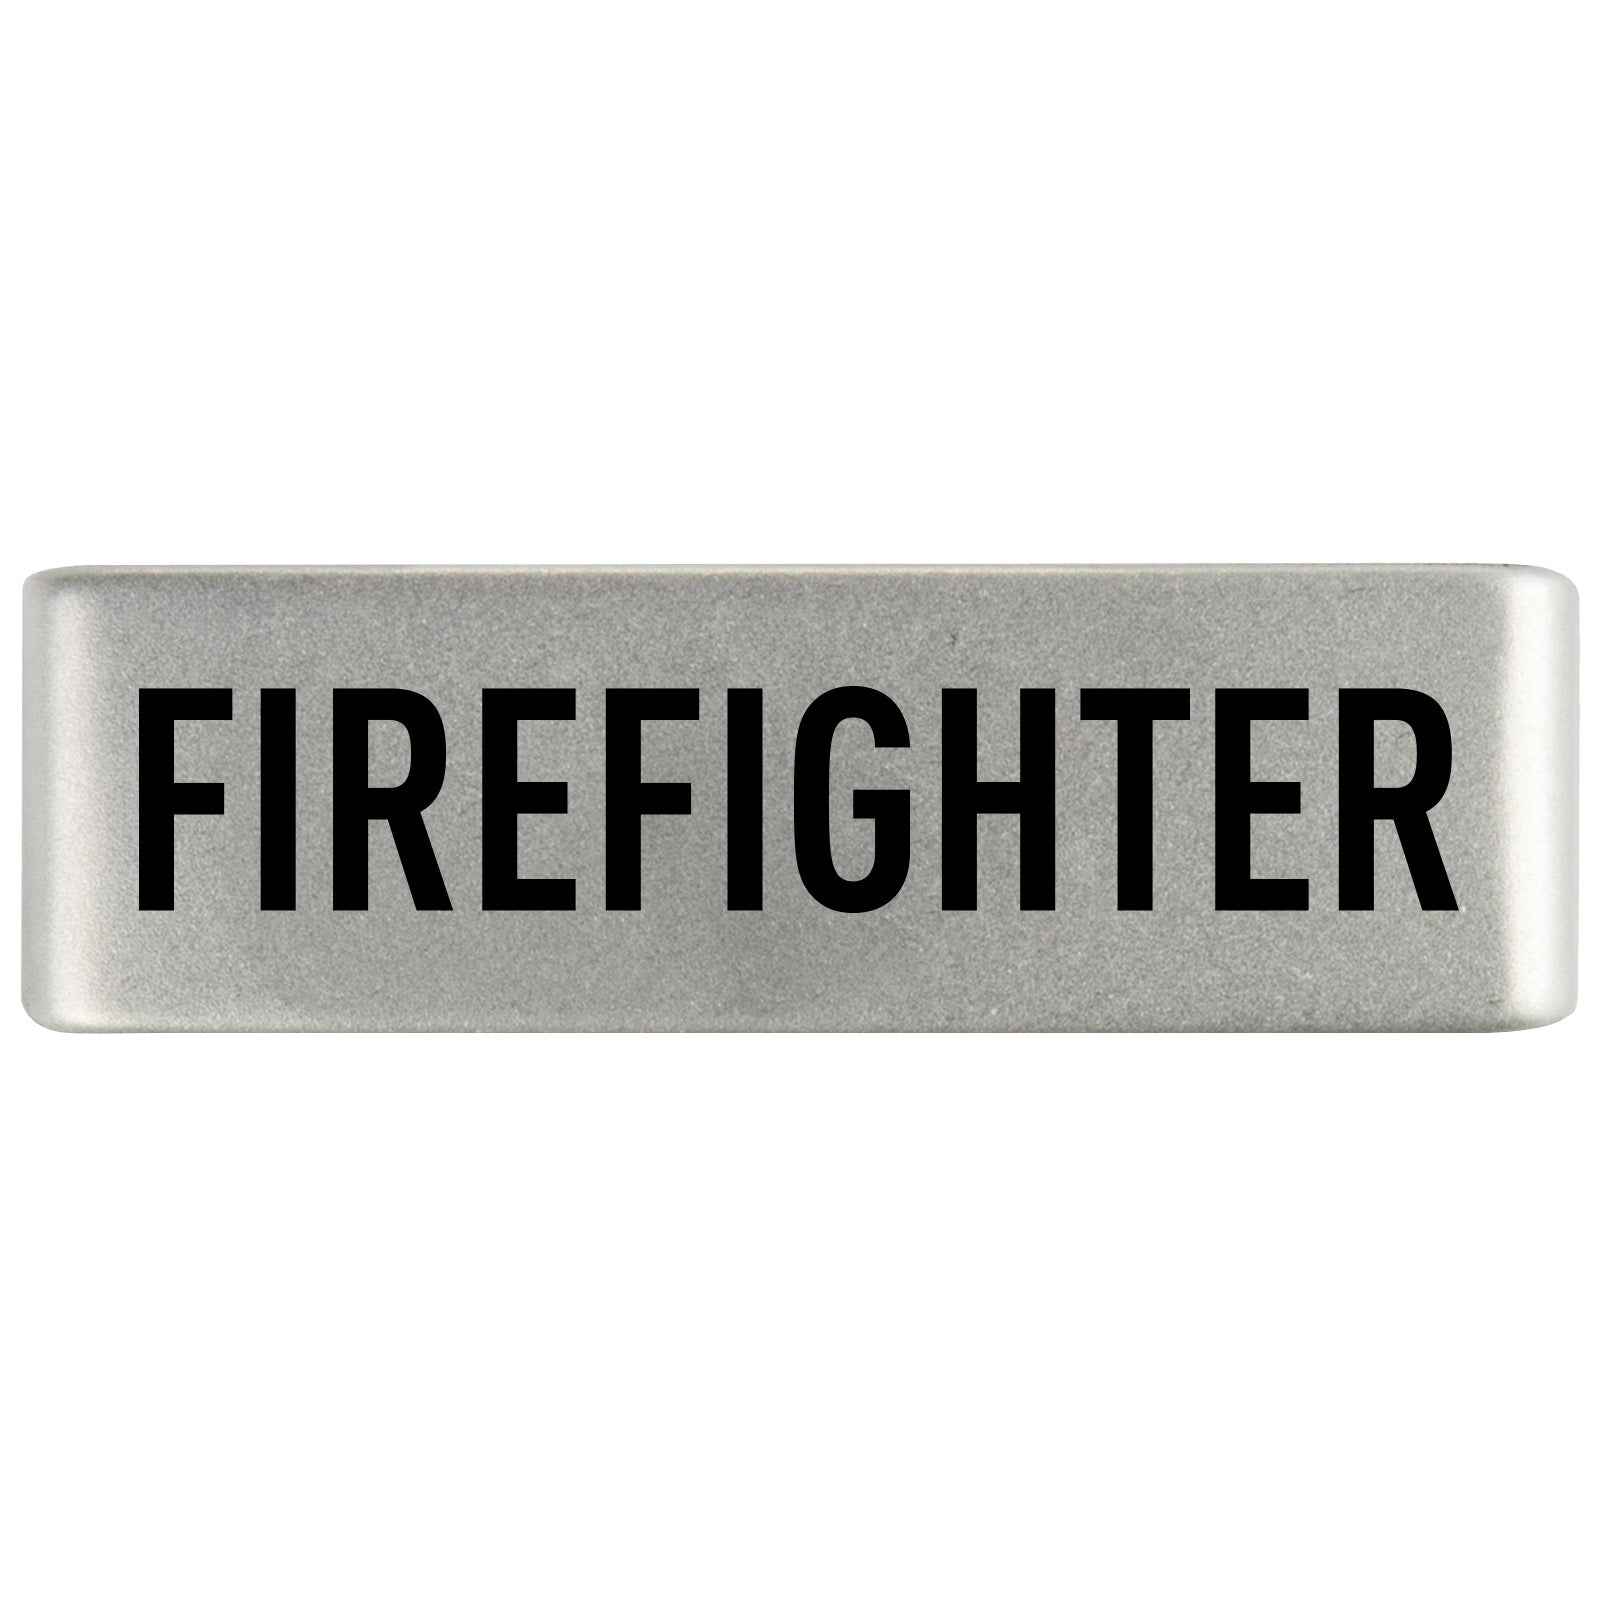 Firefighter Badge Badge 19mm - ROAD iD